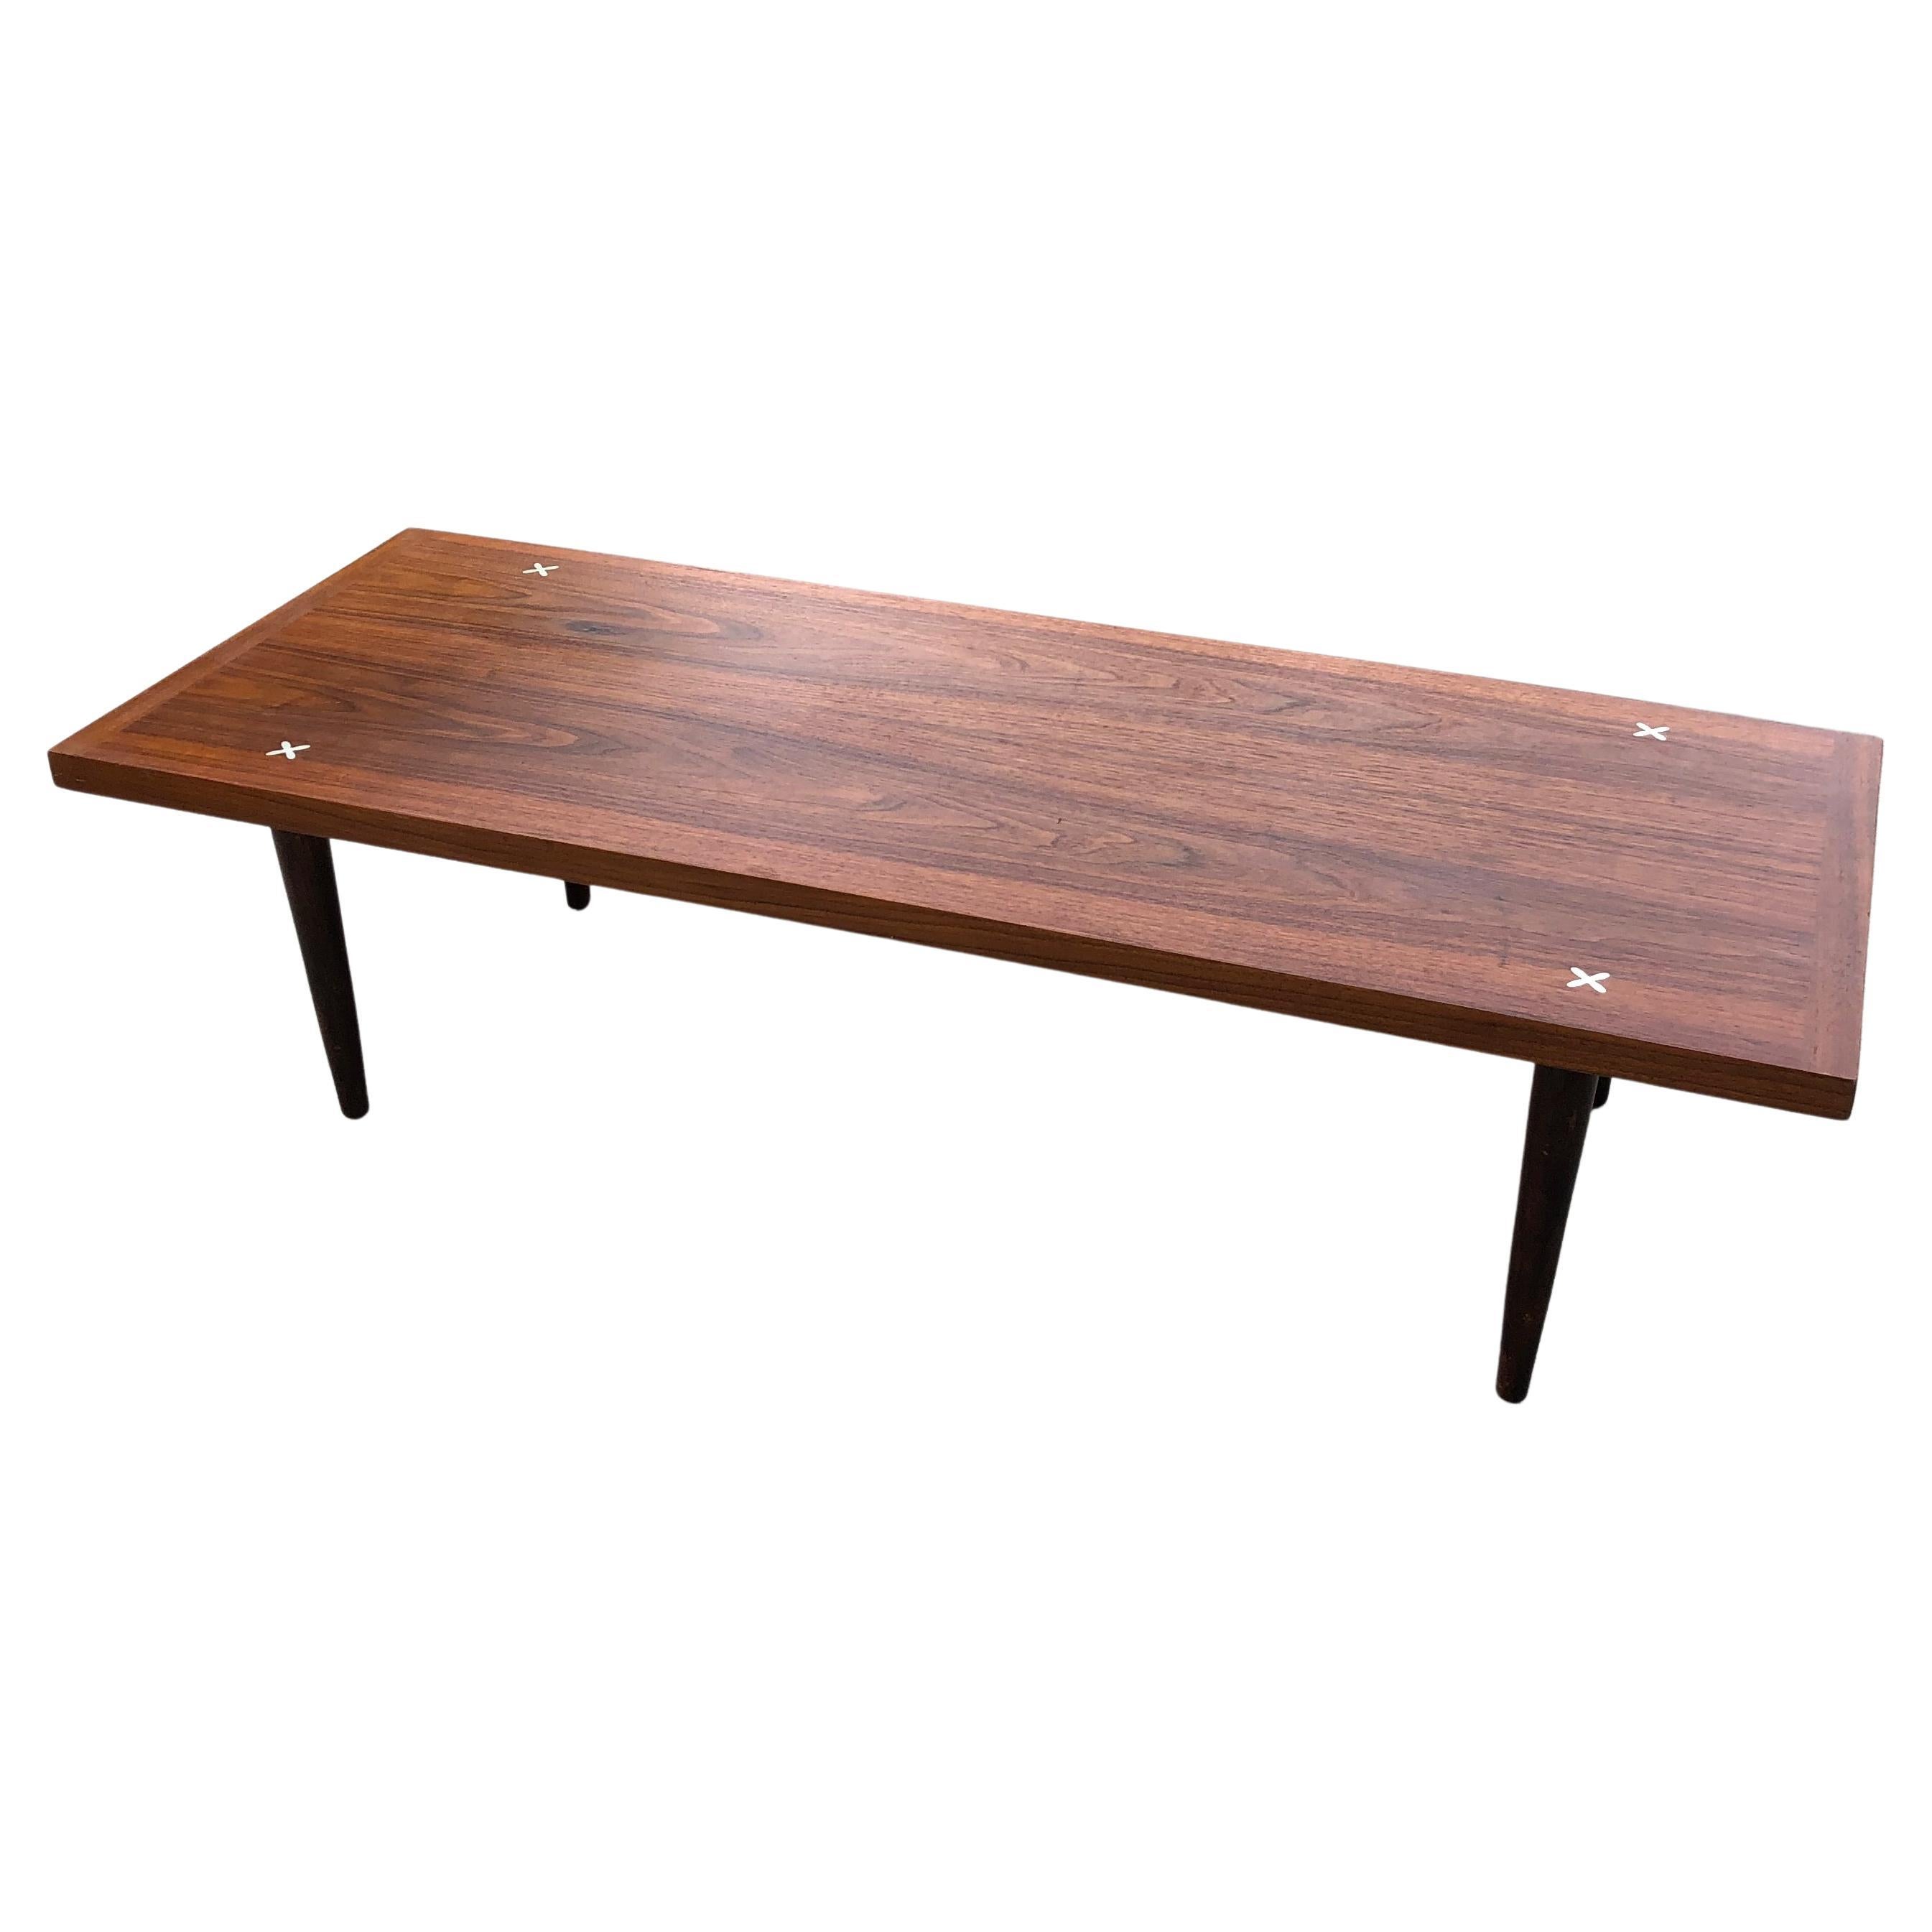 Merton Gershun Mid Century X Inlaid Coffee Table for American of Martinsville 